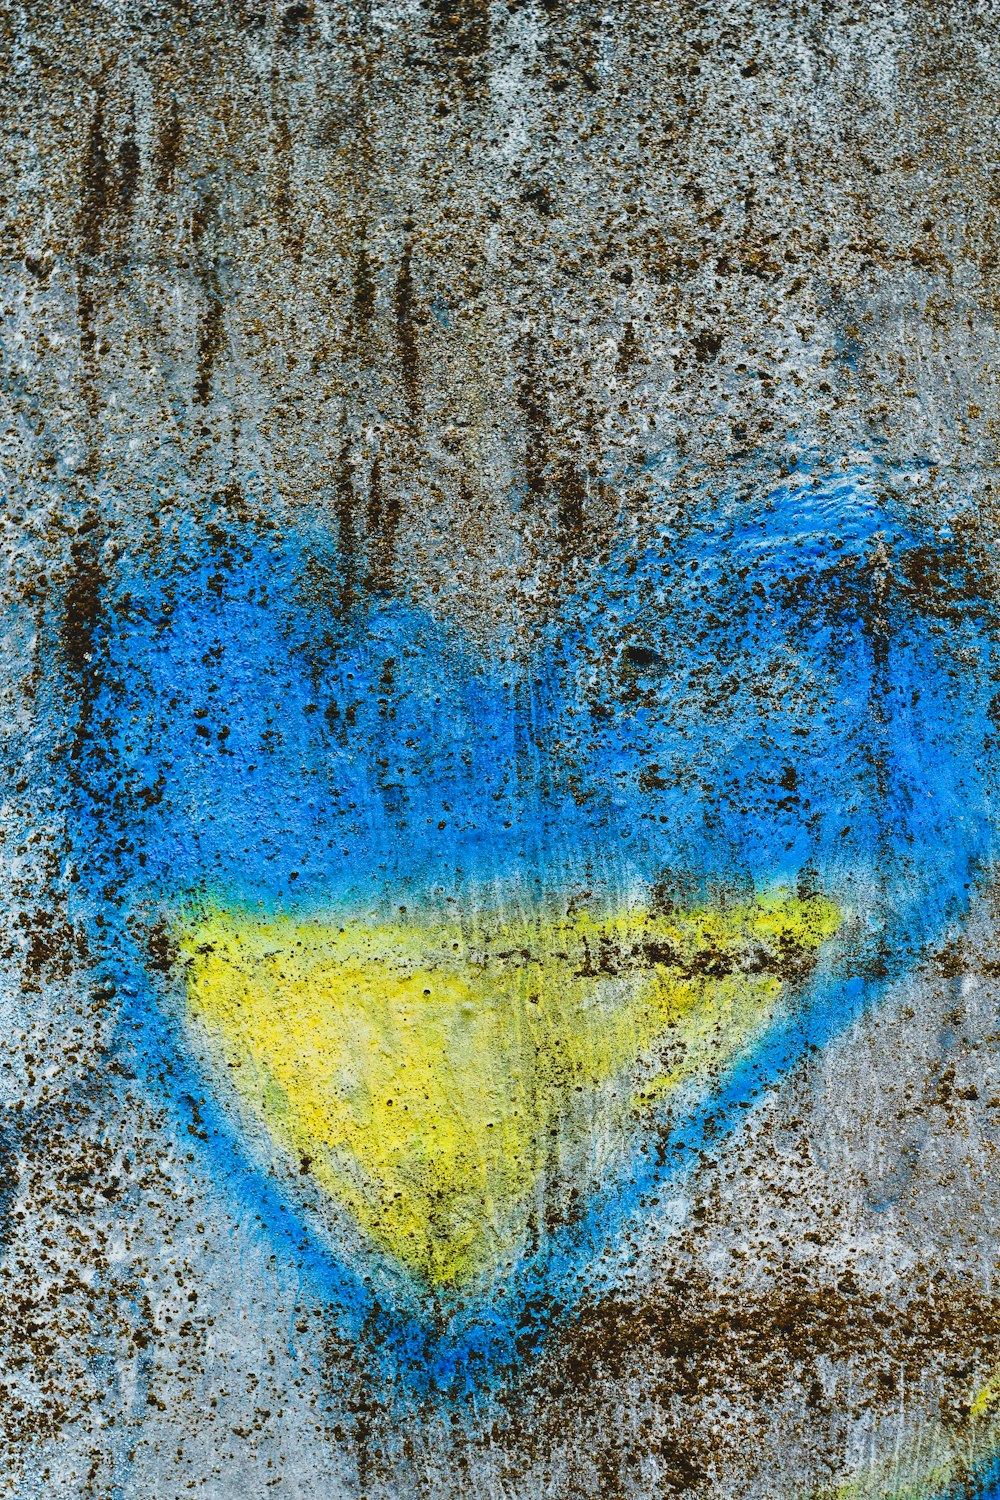 a heart painted on a wall with blue and yellow paint